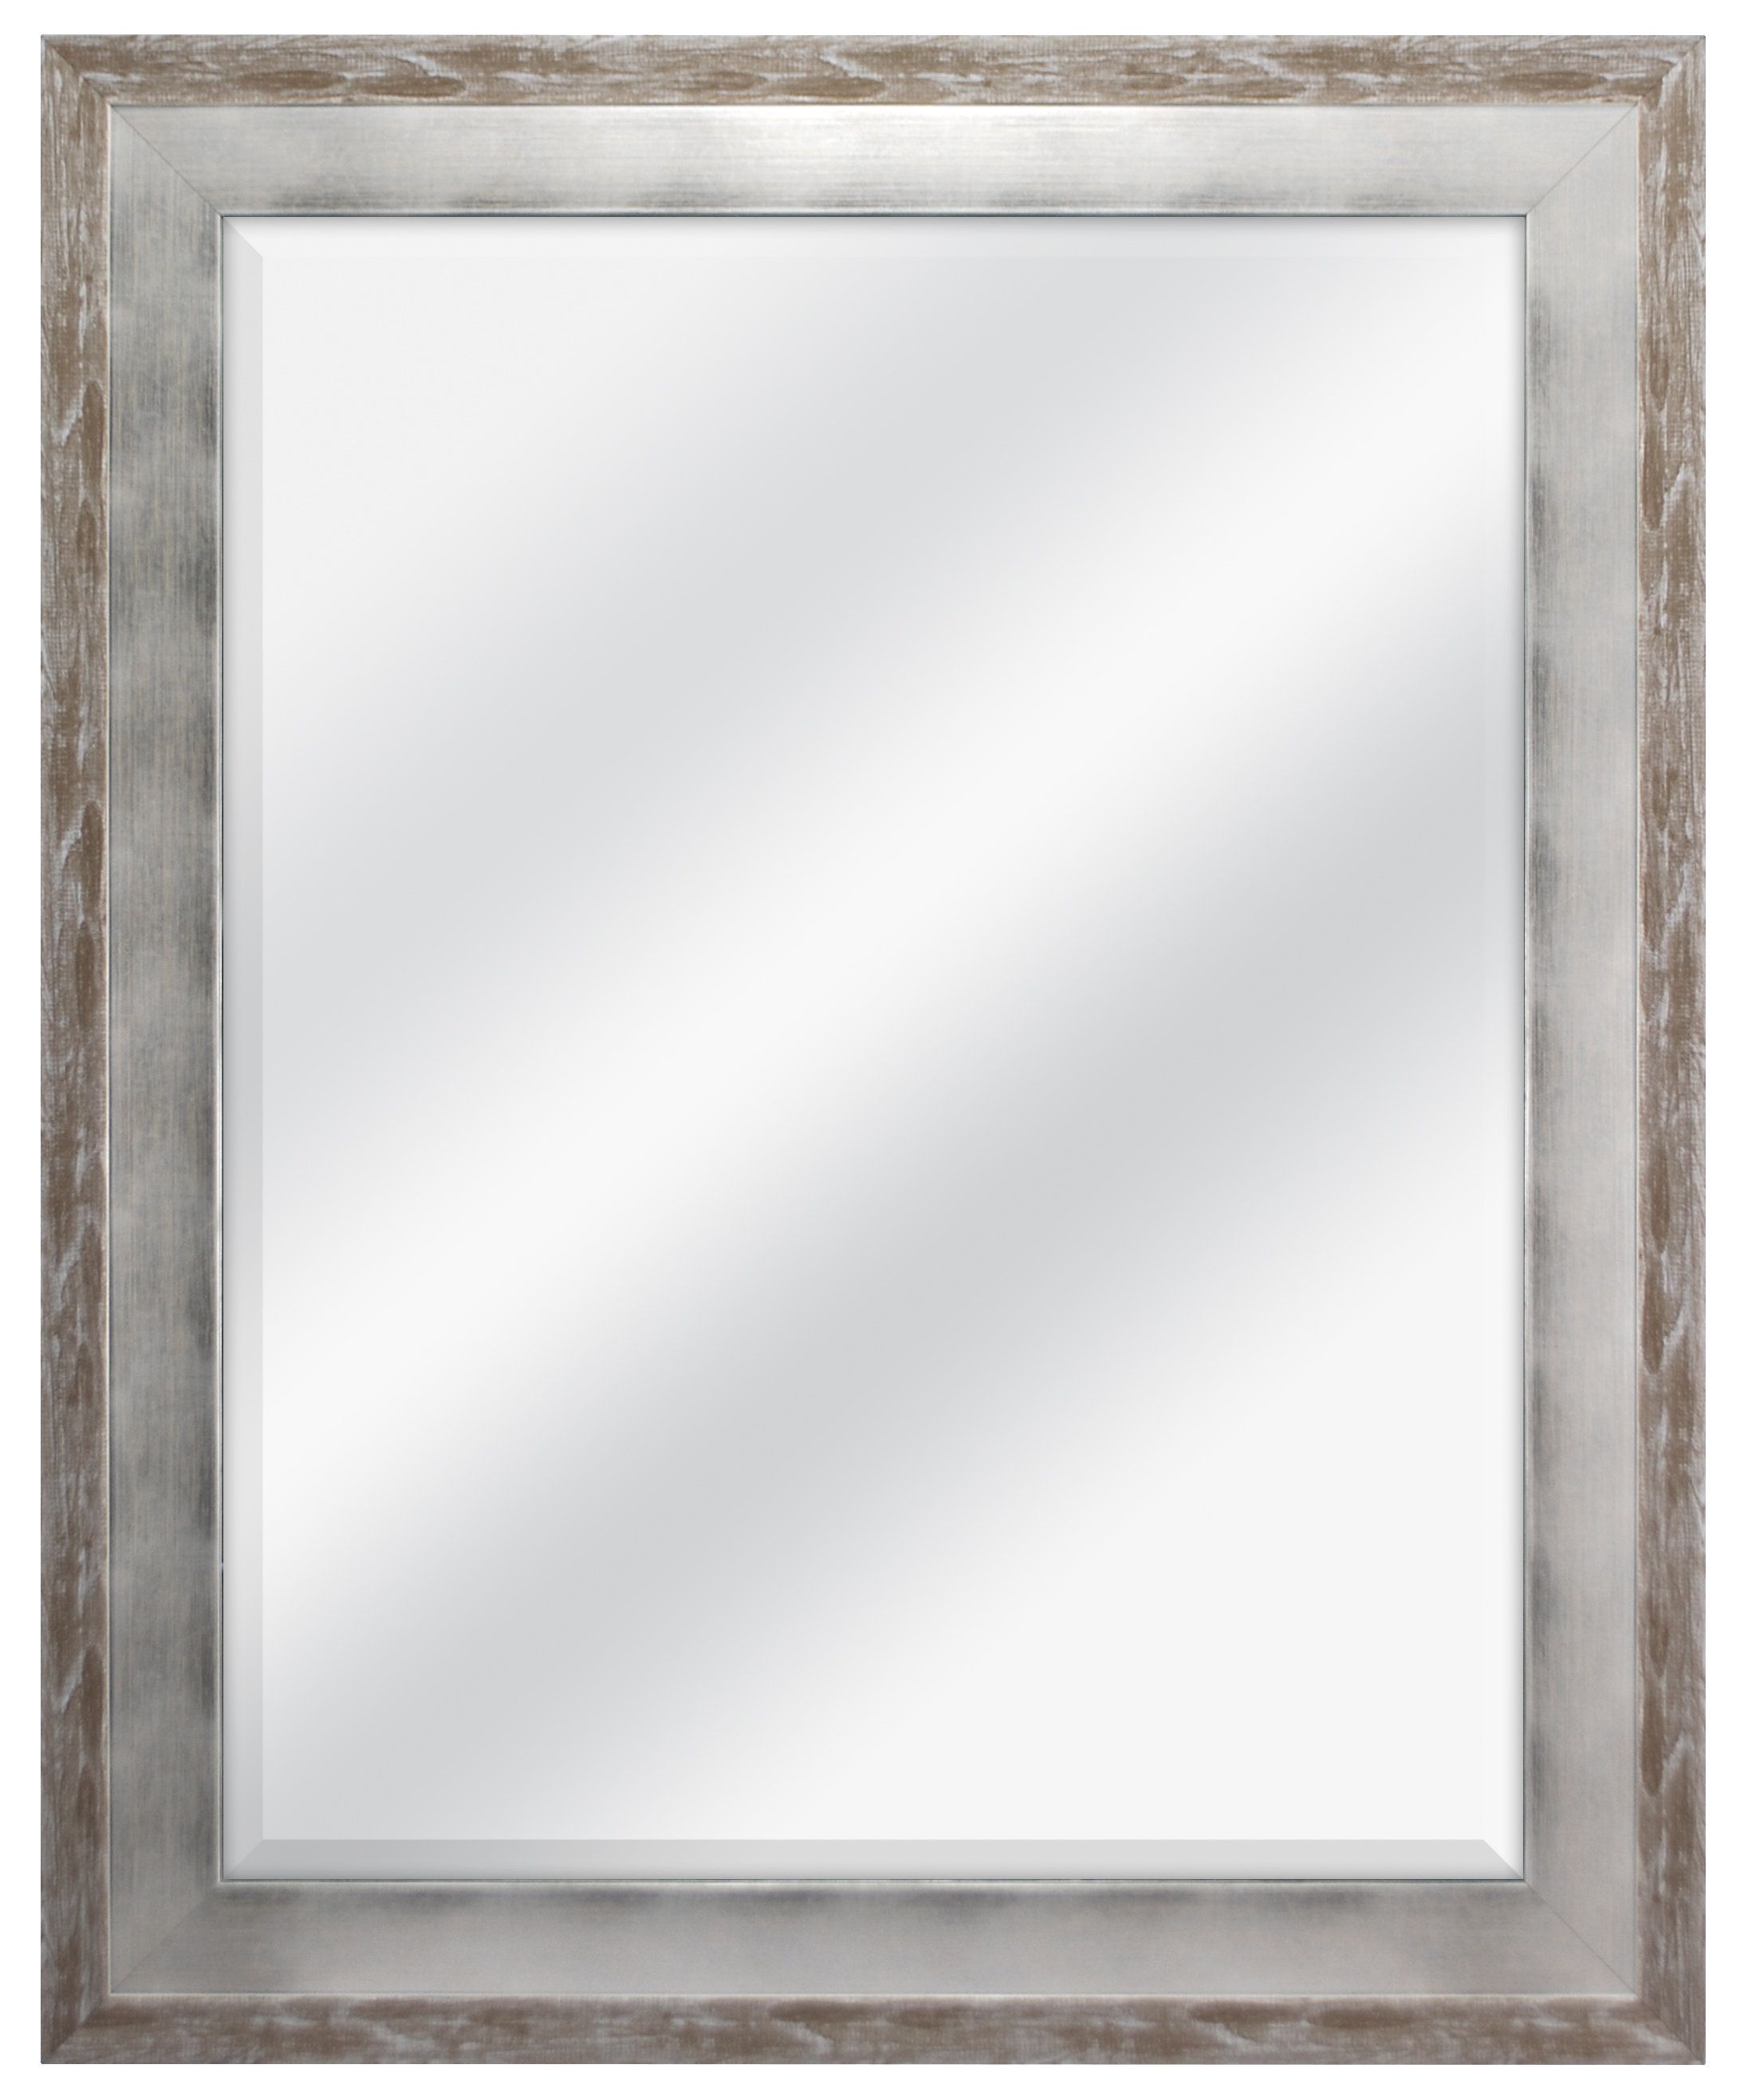 Epinal Shabby Elegance Wall Mirror Throughout Latest Farmhouse Woodgrain And Leaf Accent Wall Mirrors (View 10 of 20)